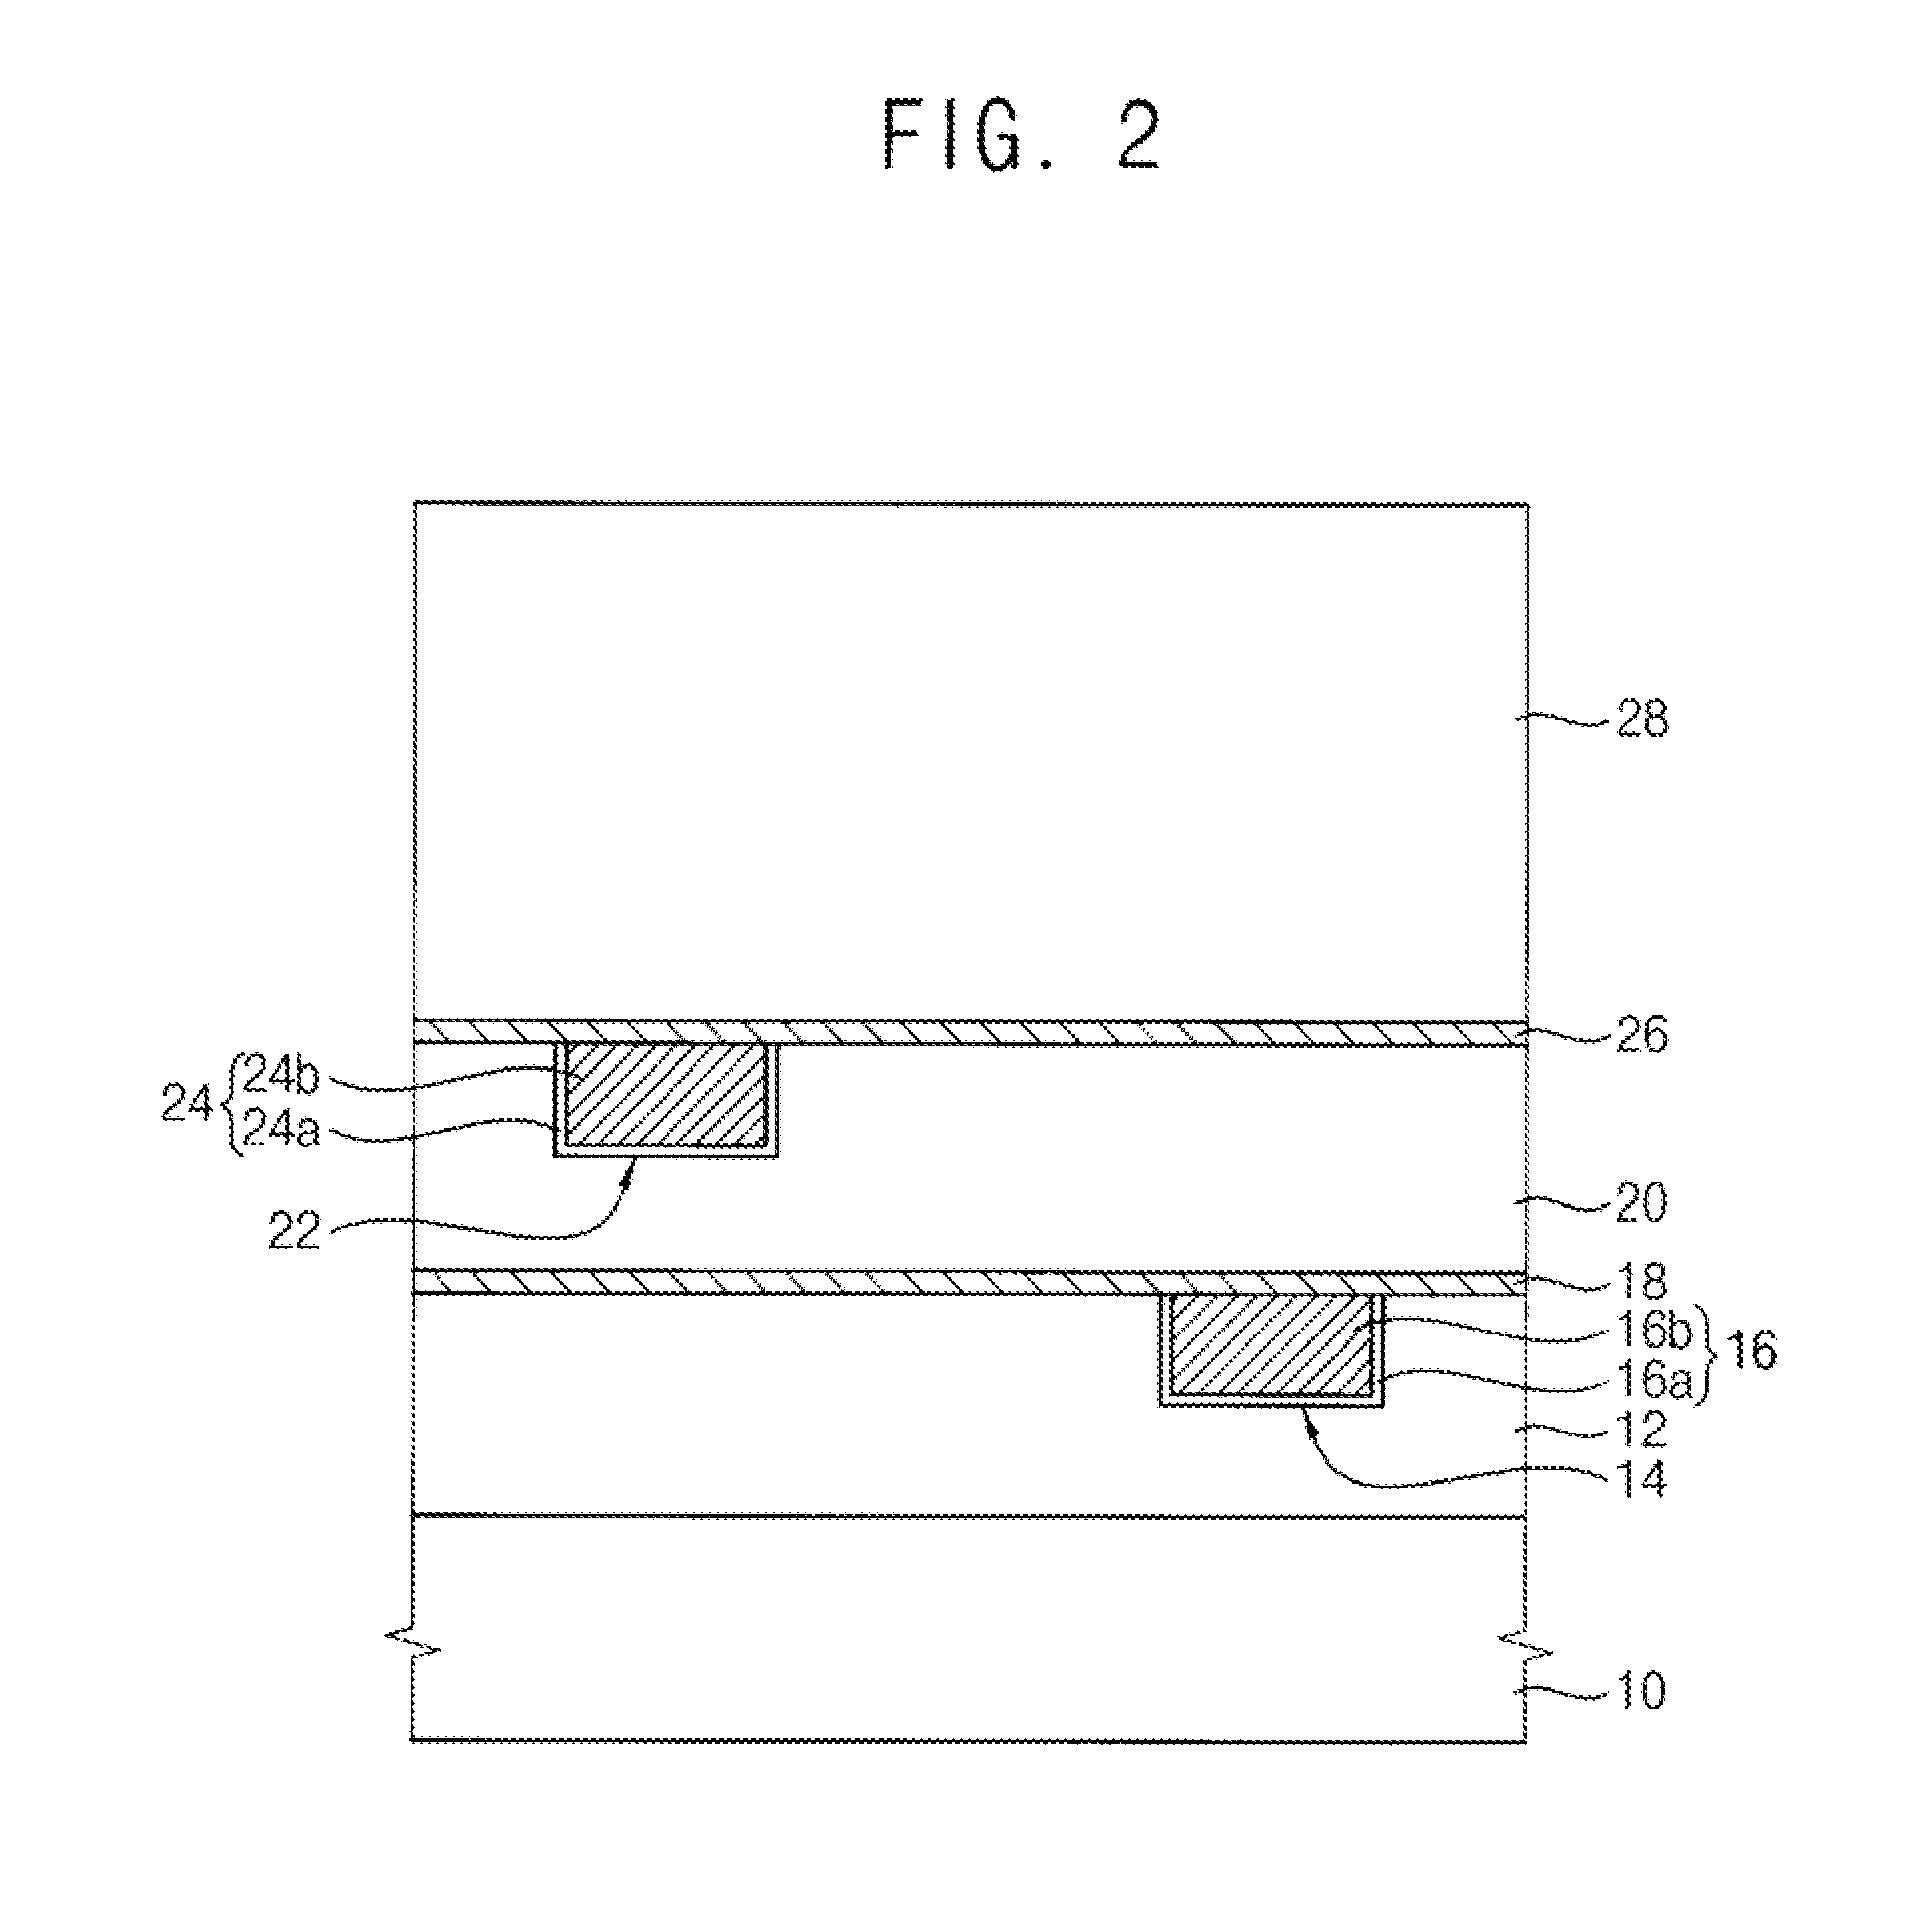 Monitoring test element groups (TEGS) for etching process and methods of manufacturing a semiconductor device using the same